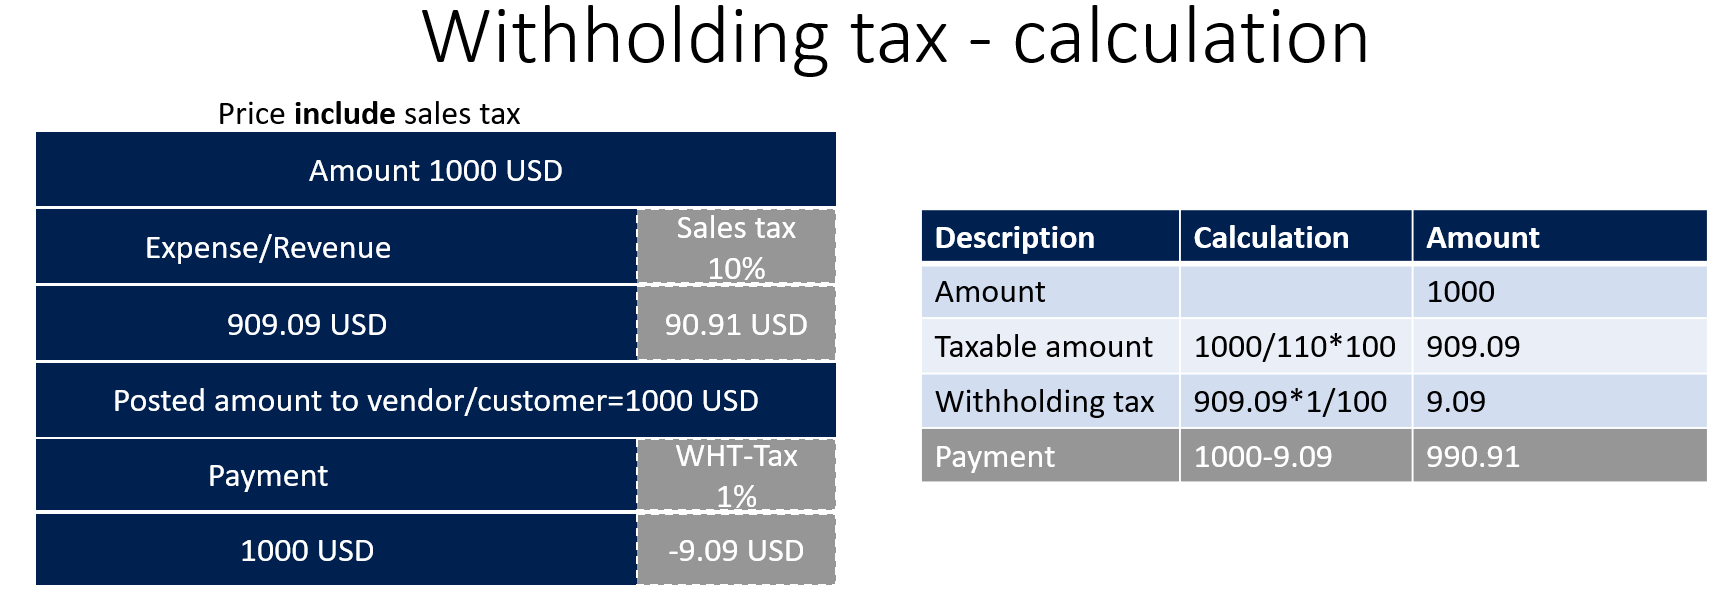 presentation of withholding tax in financial statements